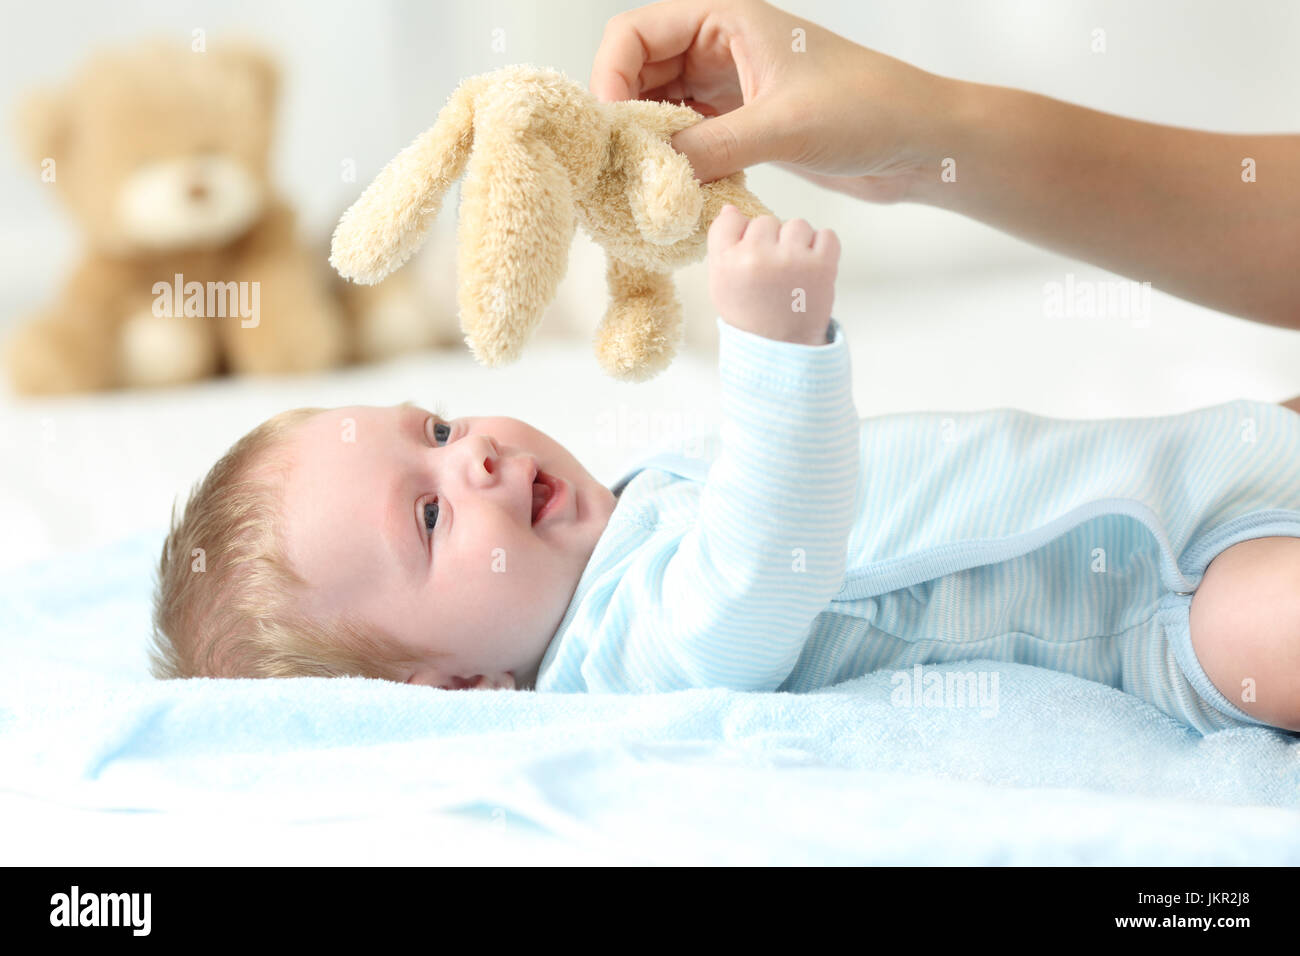 Mother hand holding a teddy and playing with her baby son on a bed Stock Photo